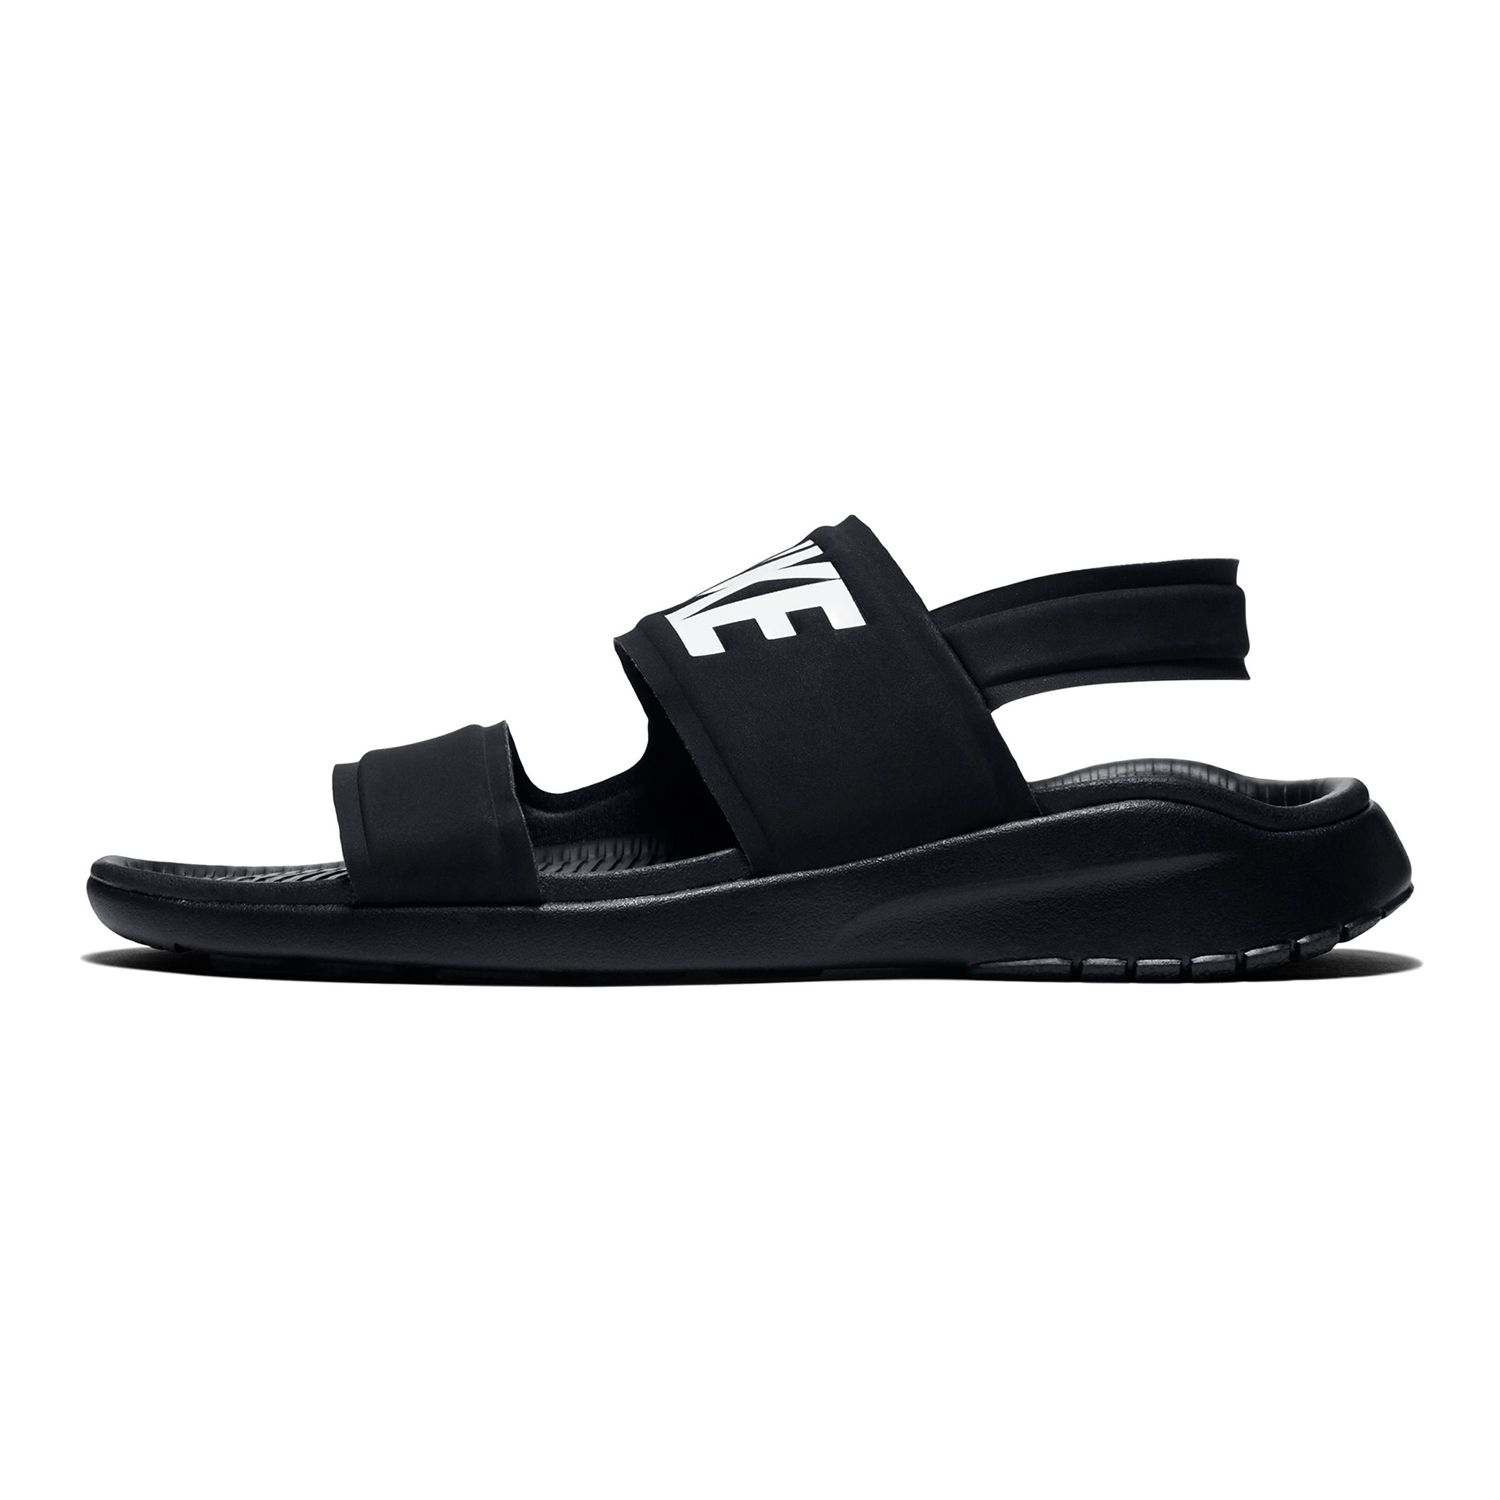 nike sandals at kohl's